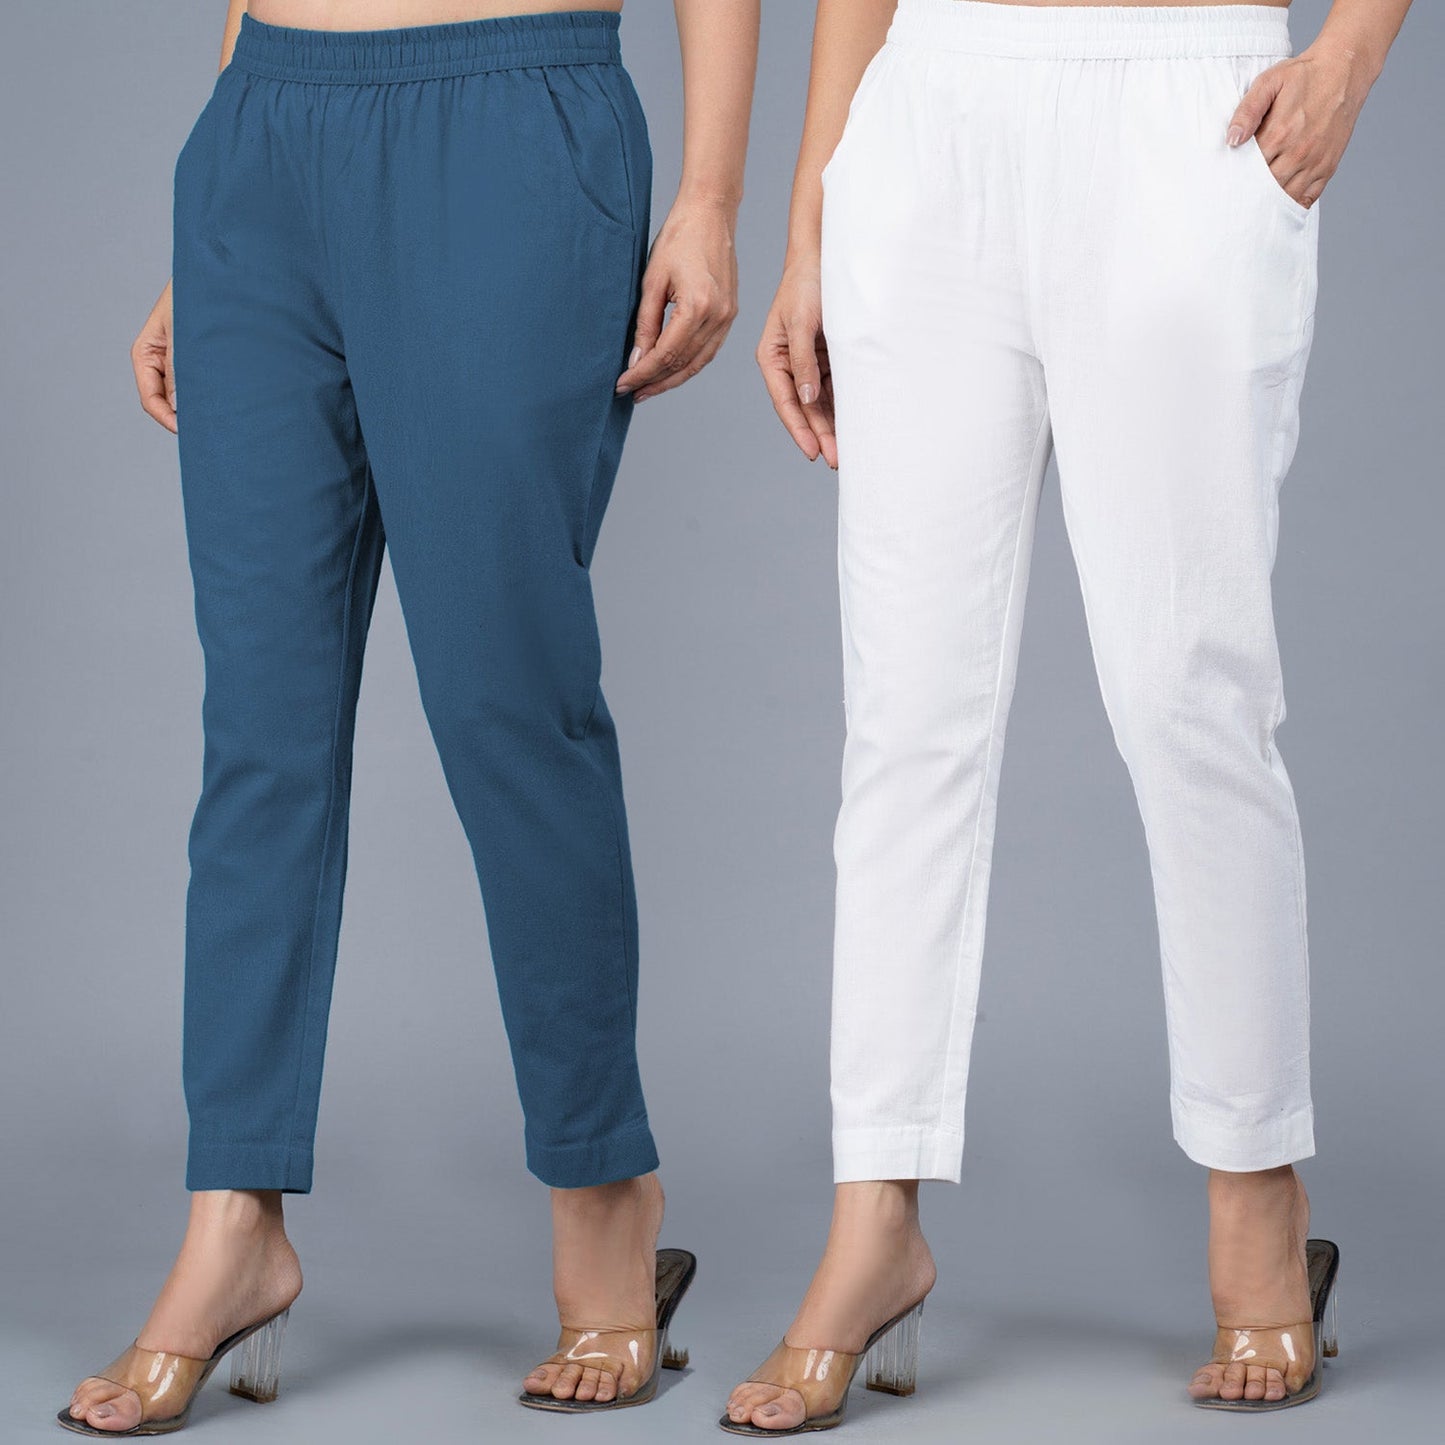 Pack Of 2 Womens Regular Fit Teal Blue And White Fully Elastic Waistband Cotton Trouser